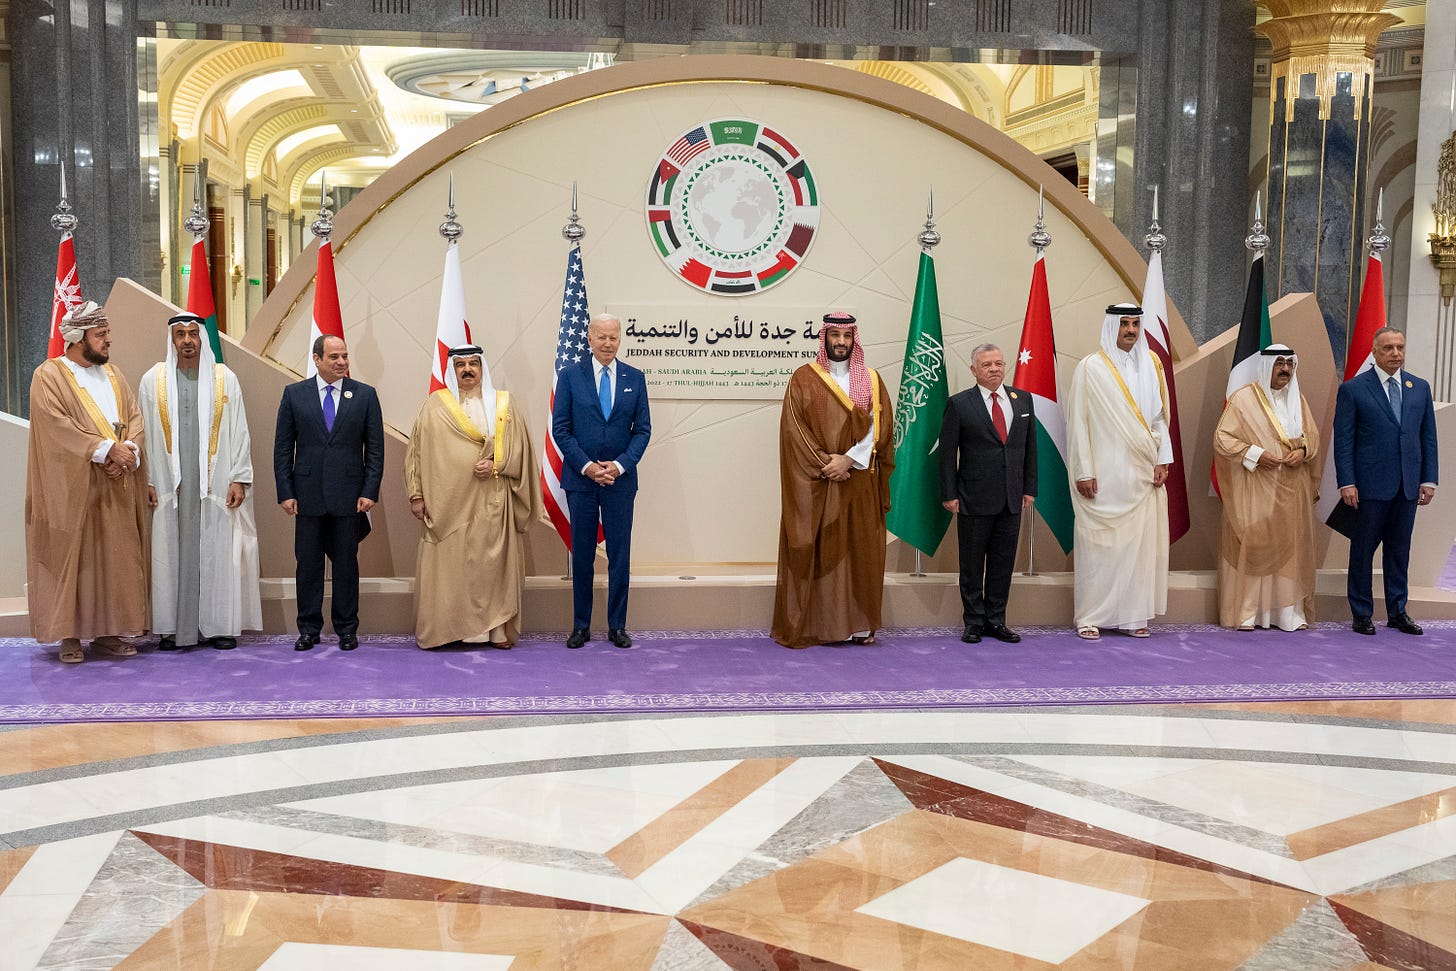 US President Biden and Saudi Crown Prince MBS, among other leaders from the region, at the Jeddah Security and Development Summit in July 2022, in Jeddah, Saudi Arabia (Image: Twitter/@POTUS)